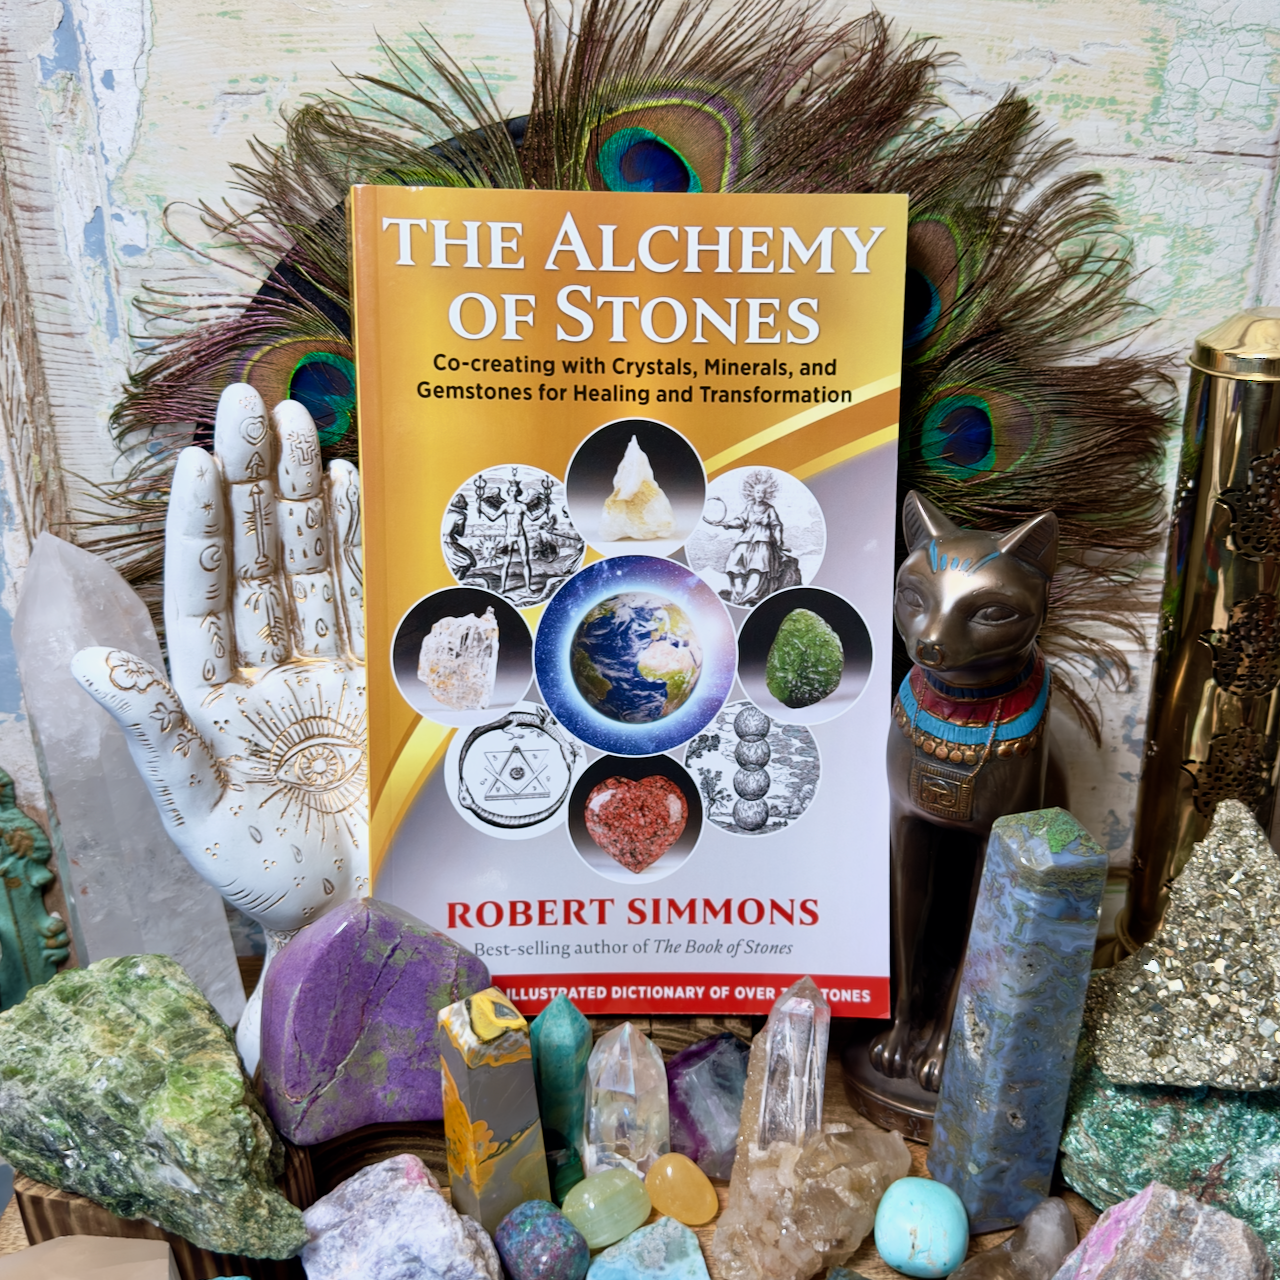 The Alchemy of Stones: Co-creating with Crystals, Minerals, and Gemstones for Healing and Transformation